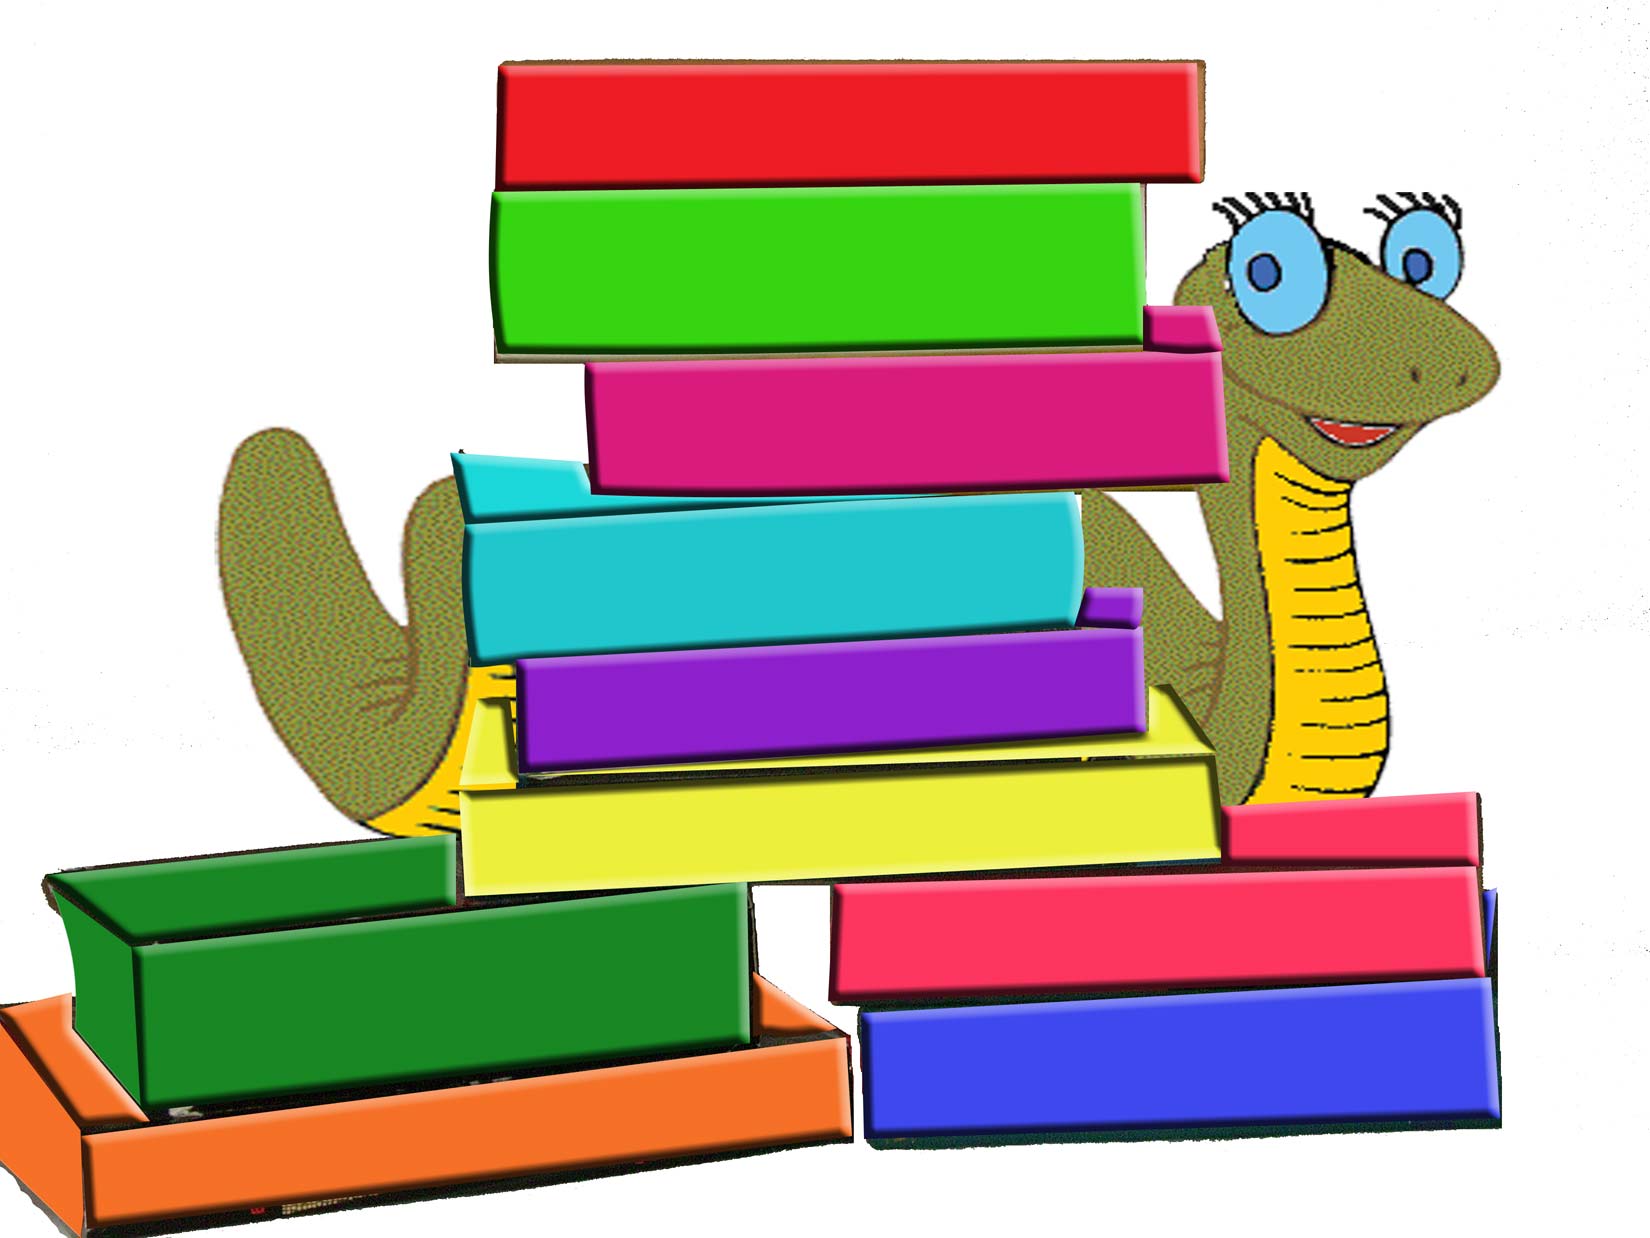 Stack of books clipart item free clipart images - Clipartix